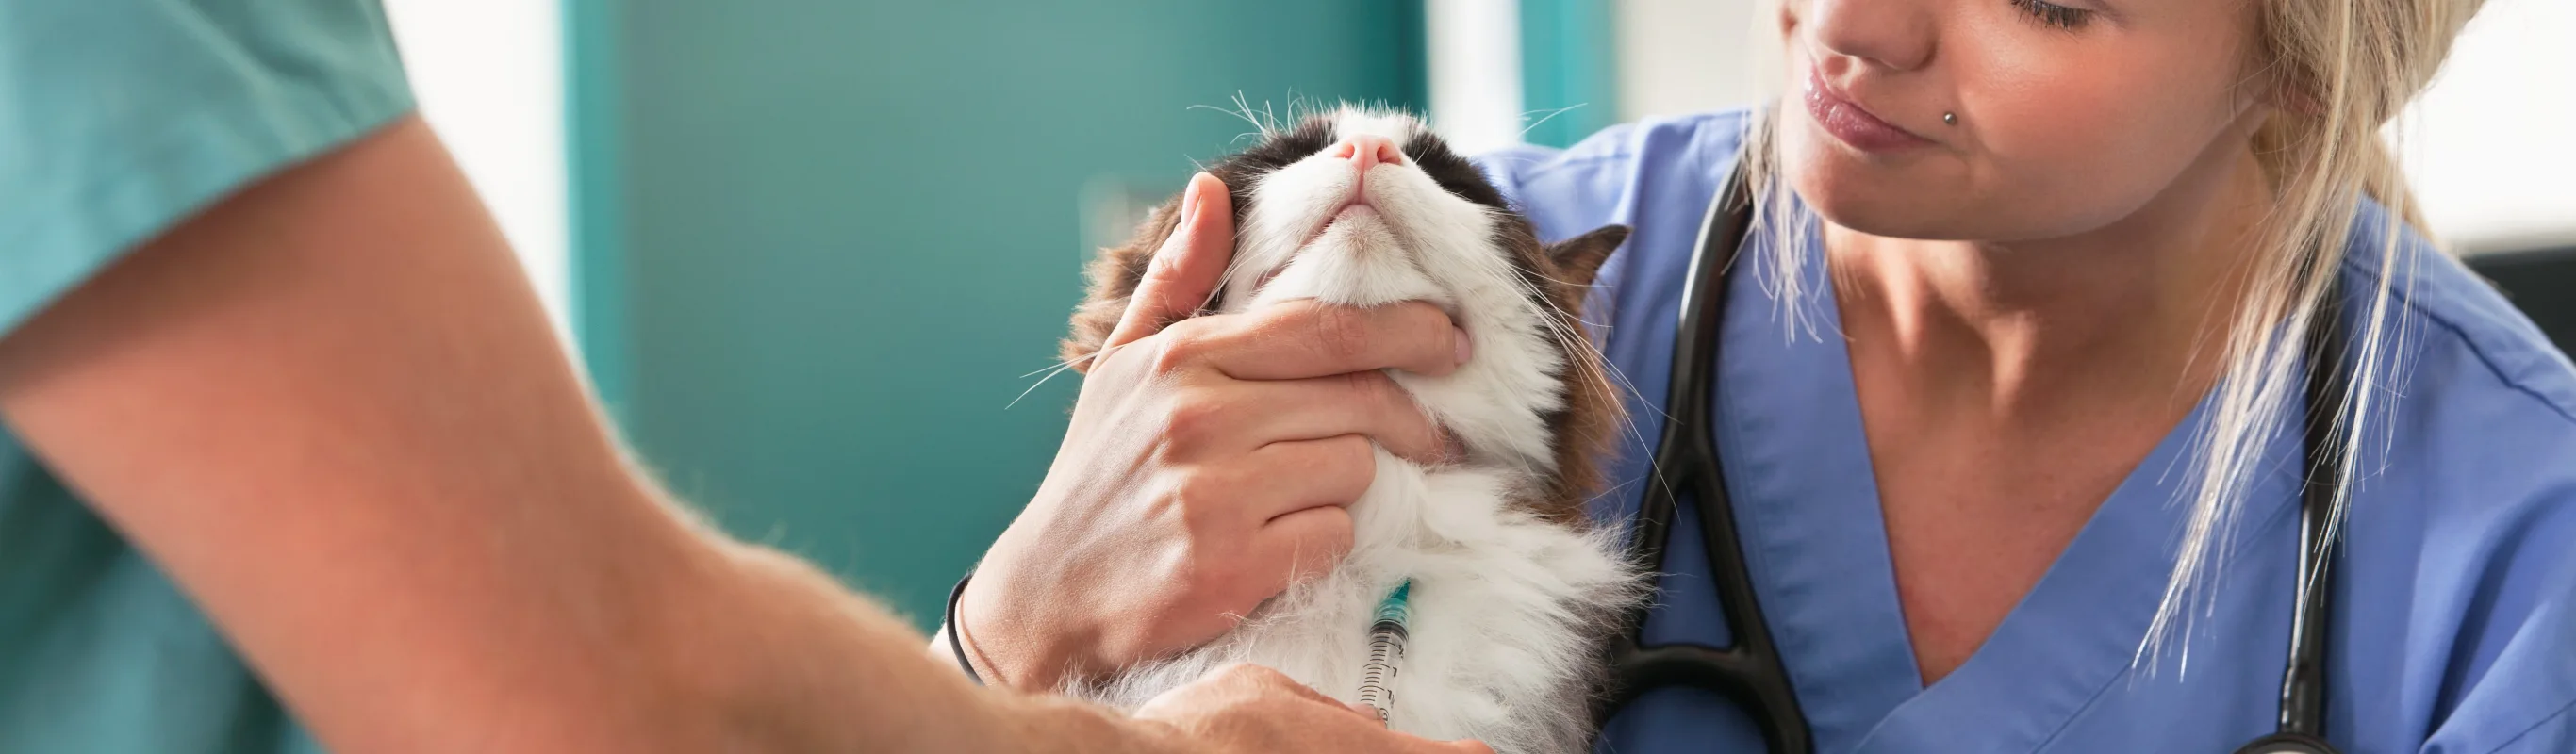 Cat being treated by veterinary staff